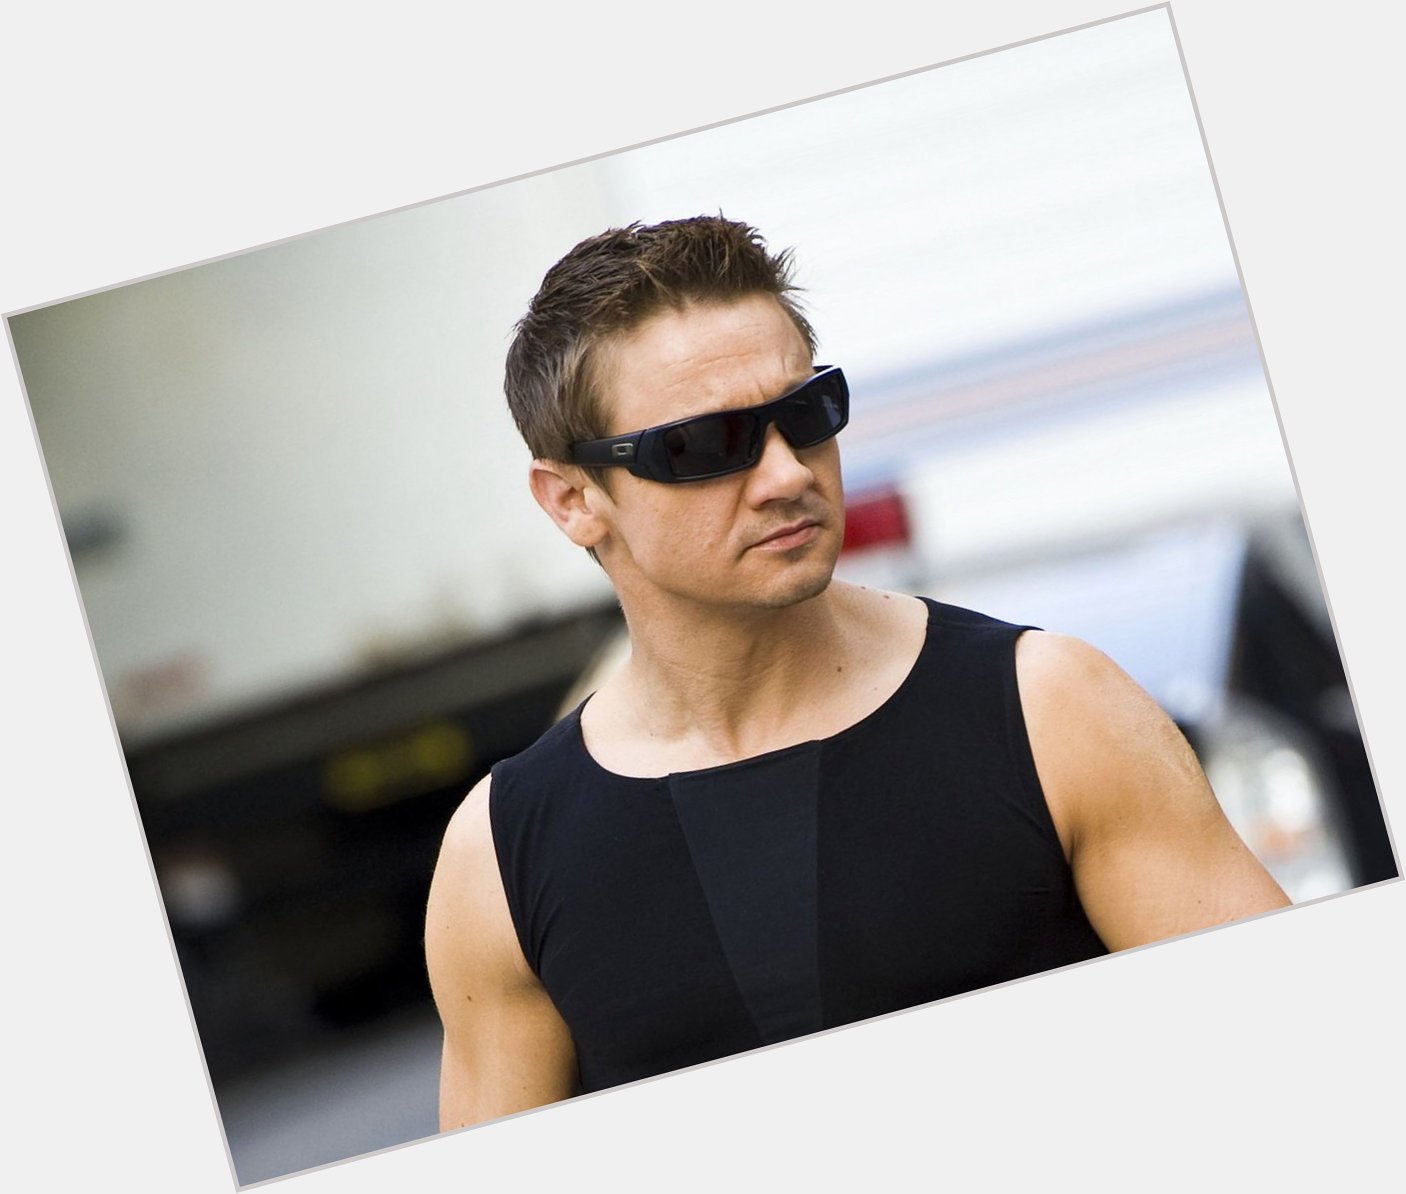 Happy birthday, Jeremy Renner! Maybe this year Marvel will be nice and announce a Black Widow & Hawkeye movie. 